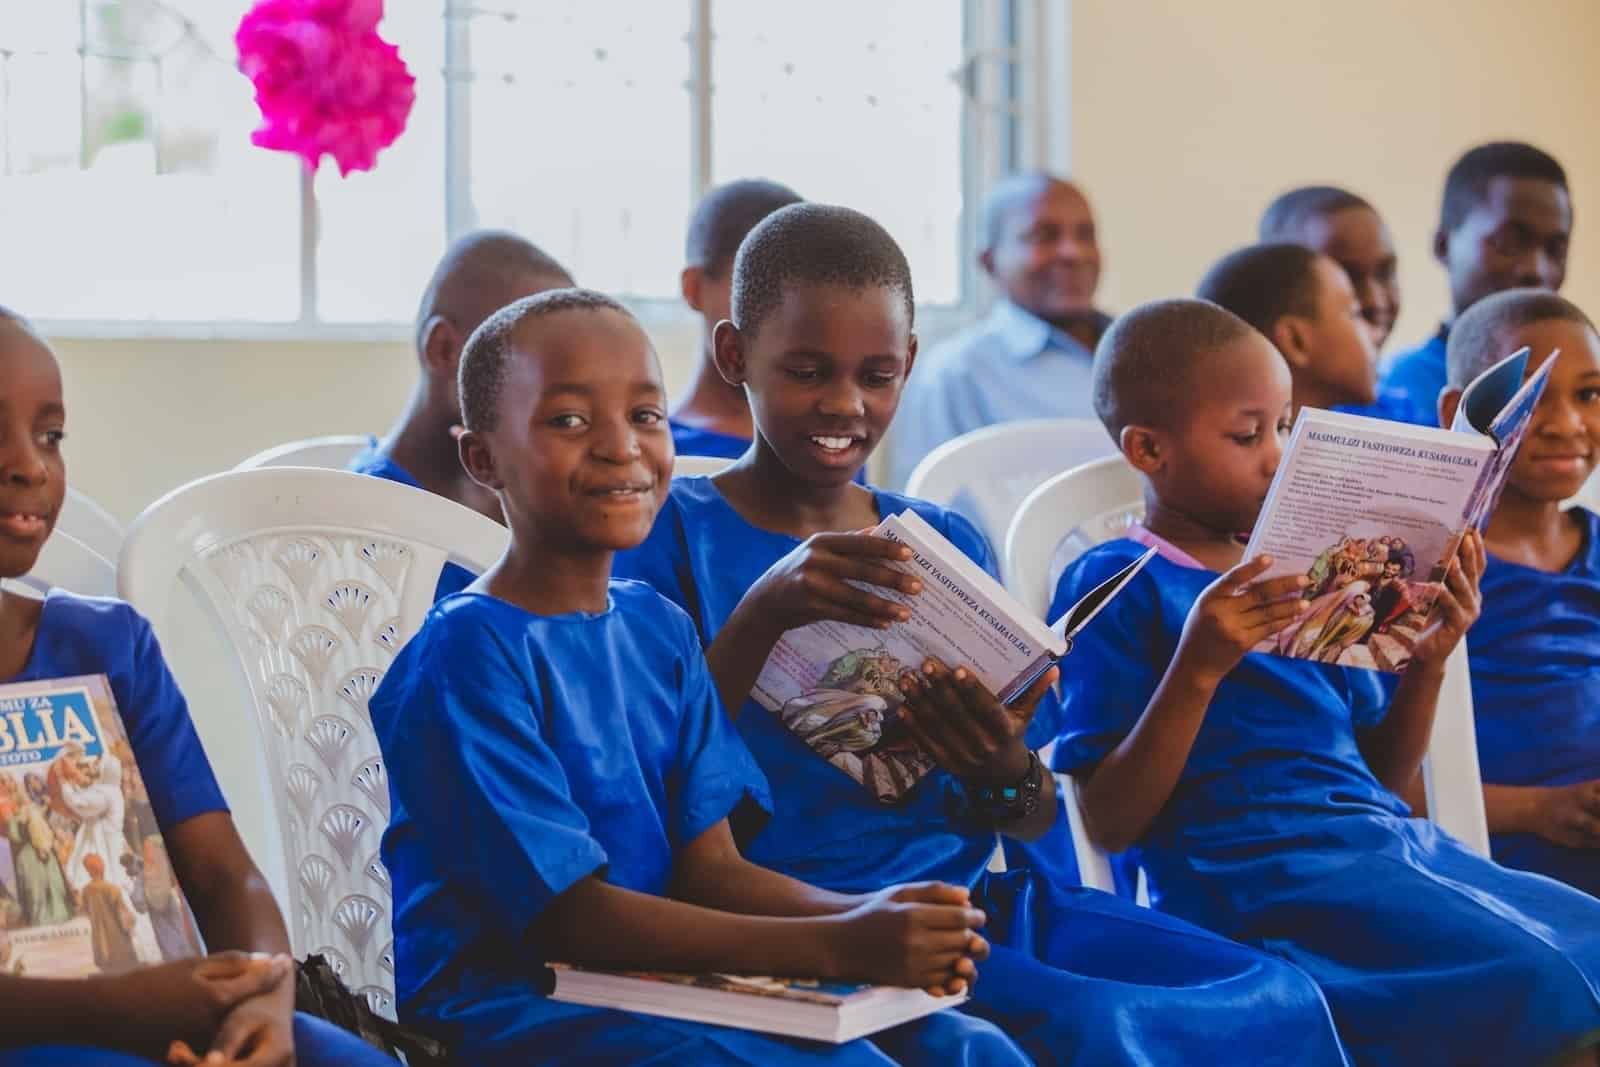 A group of girls in Tanzania wearing blue uniform dresses sit on white plastic chairs, each holding and reading Bibles. The girl in the foreground smiles at the camera.